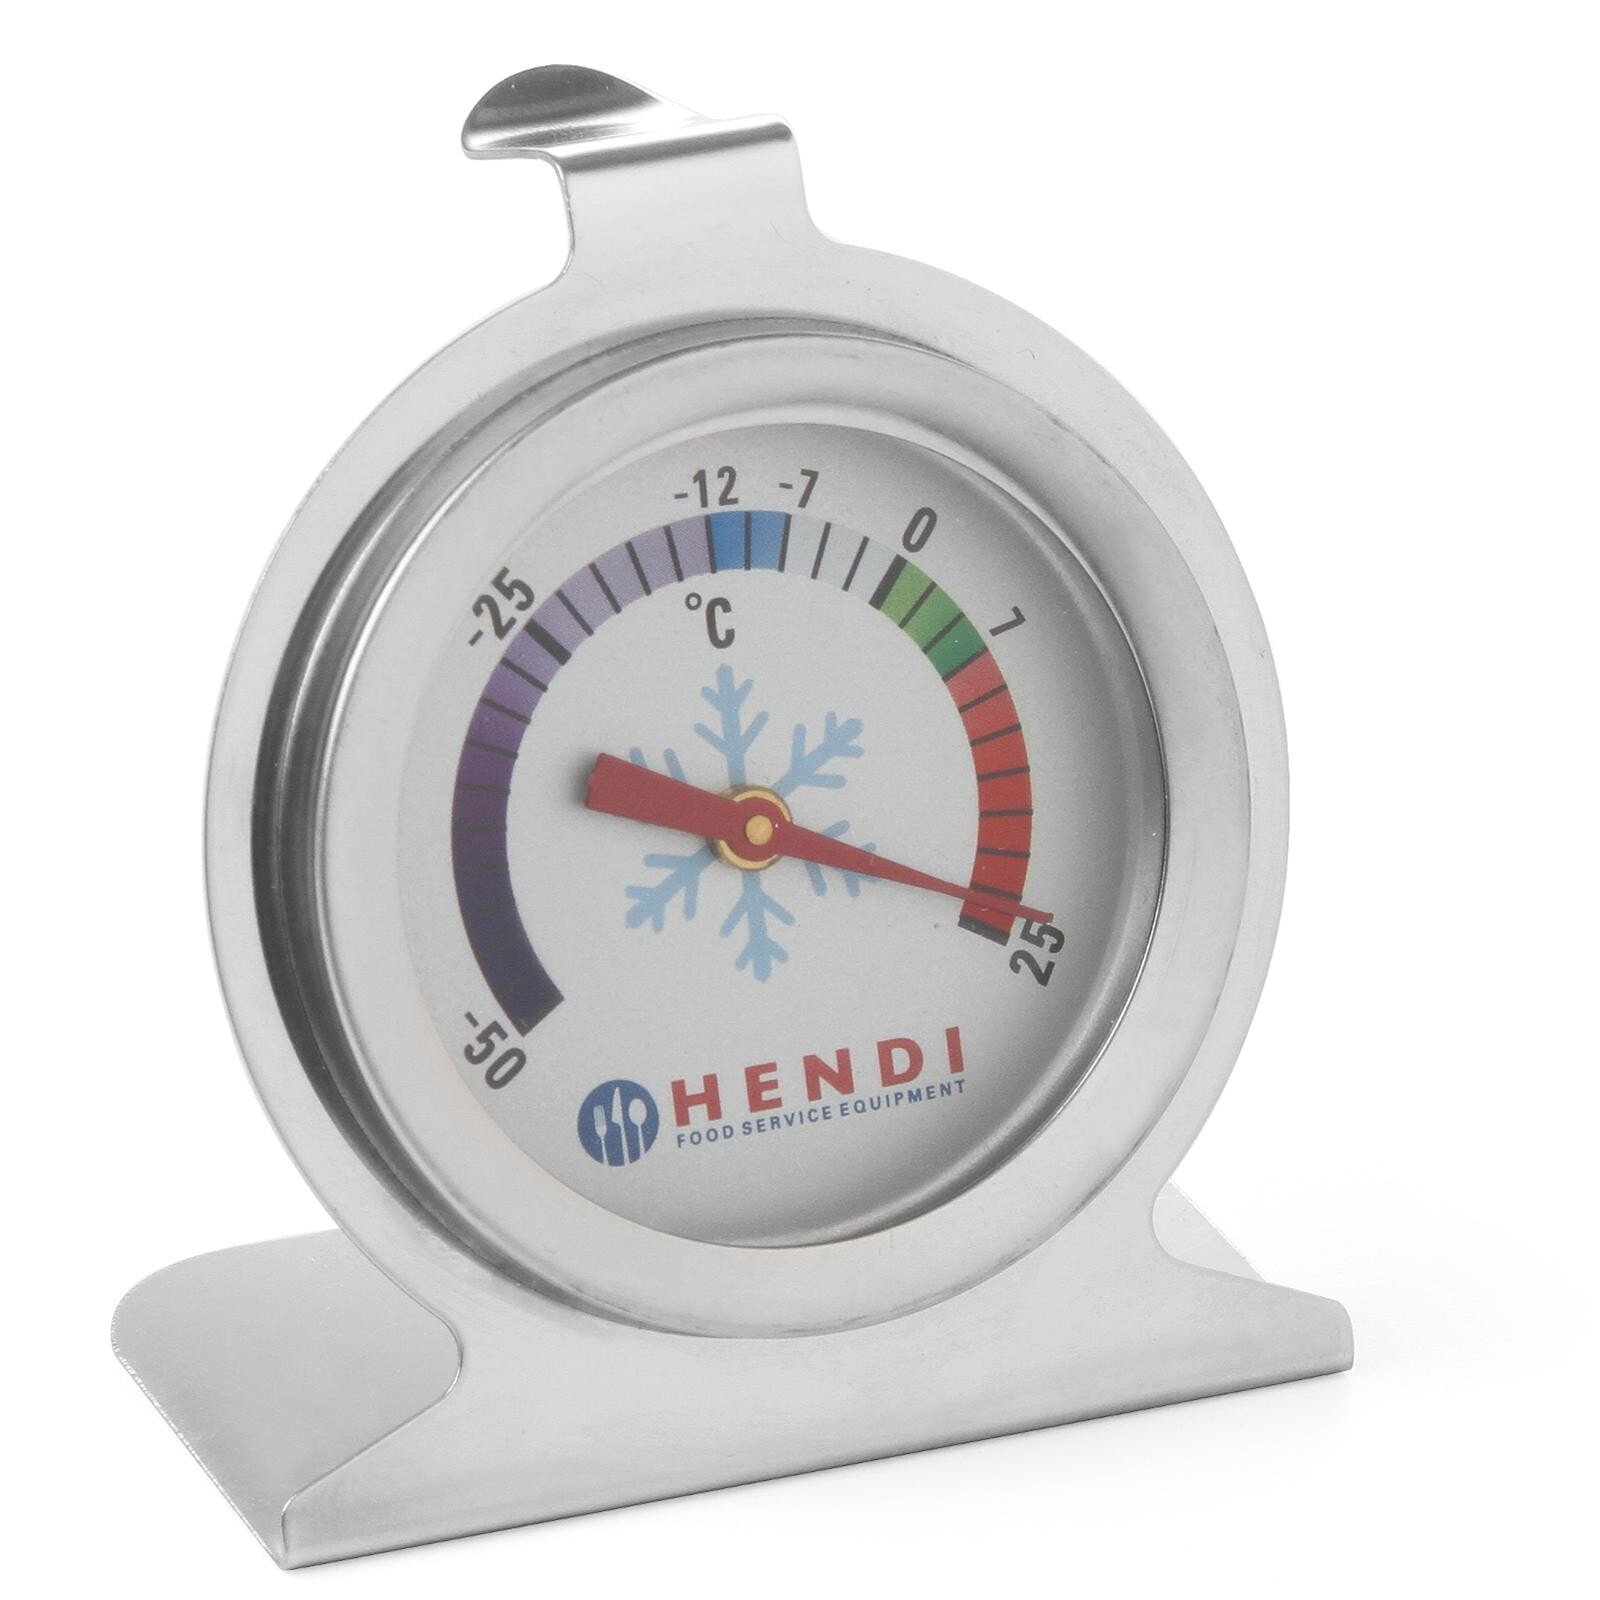 Gastronomic thermometer for freezers and refrigerators - Hendi 271186